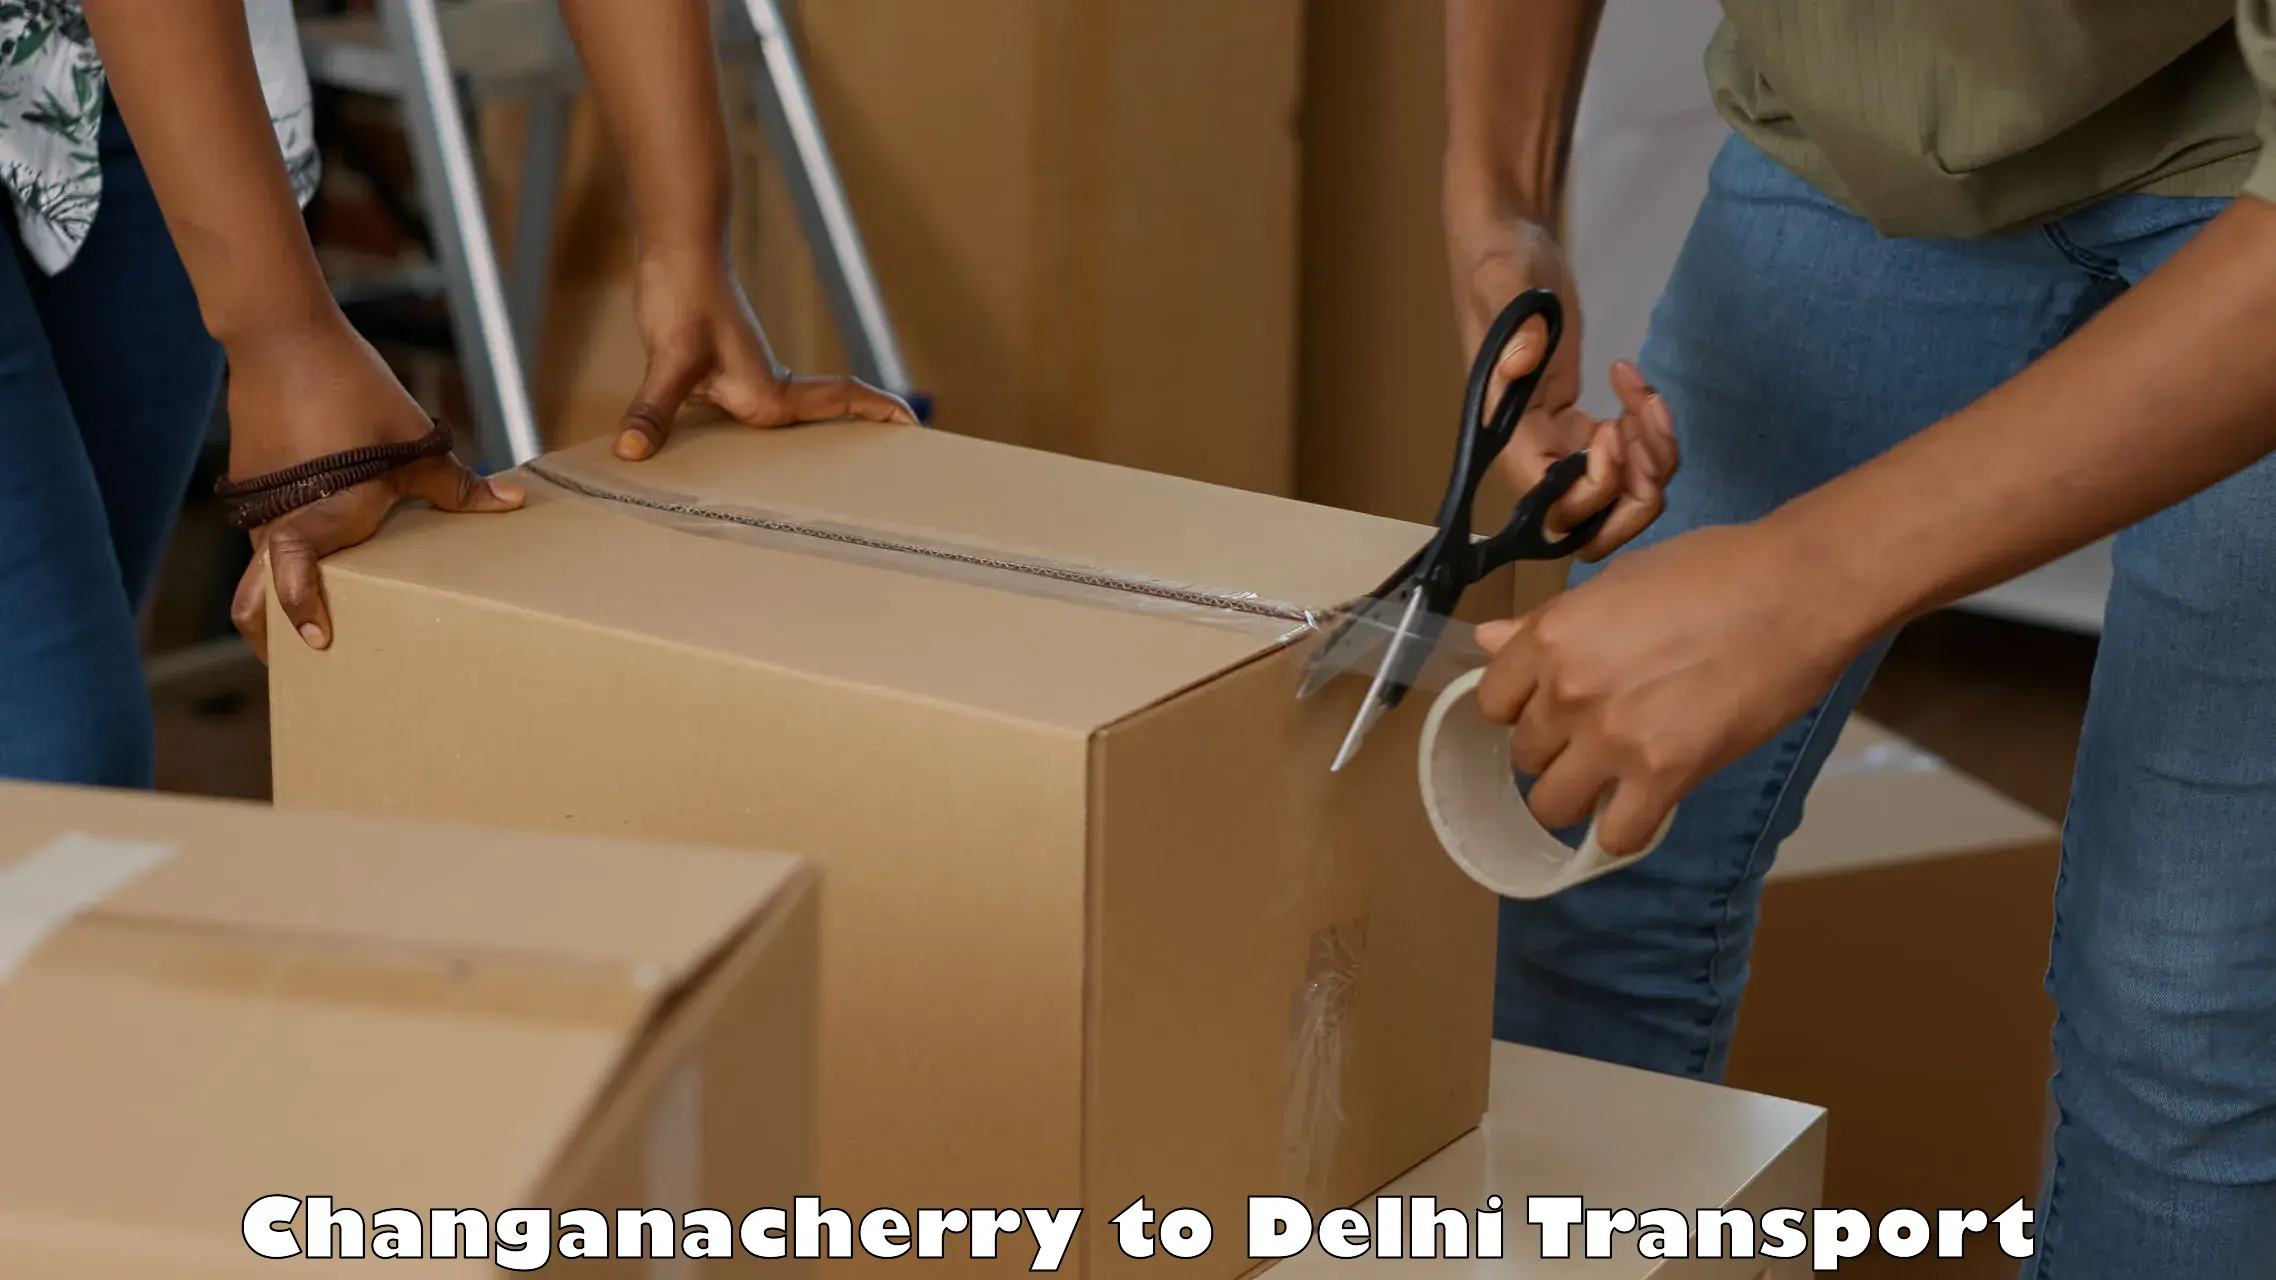 Air freight transport services Changanacherry to NCR